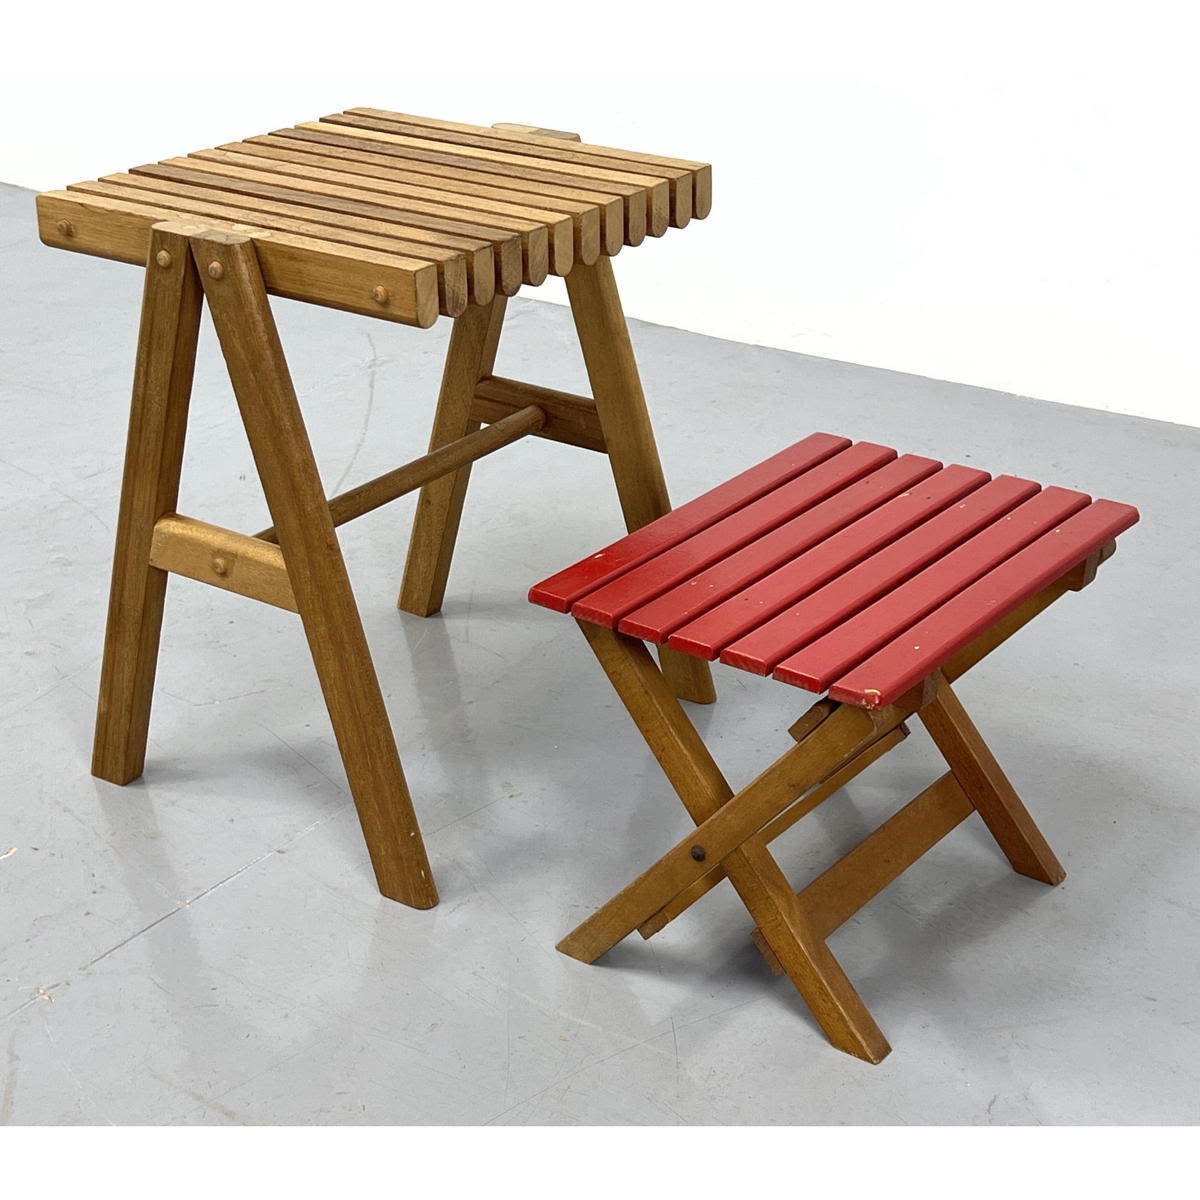 2 Small Slat Tables 

Dimensions: H: